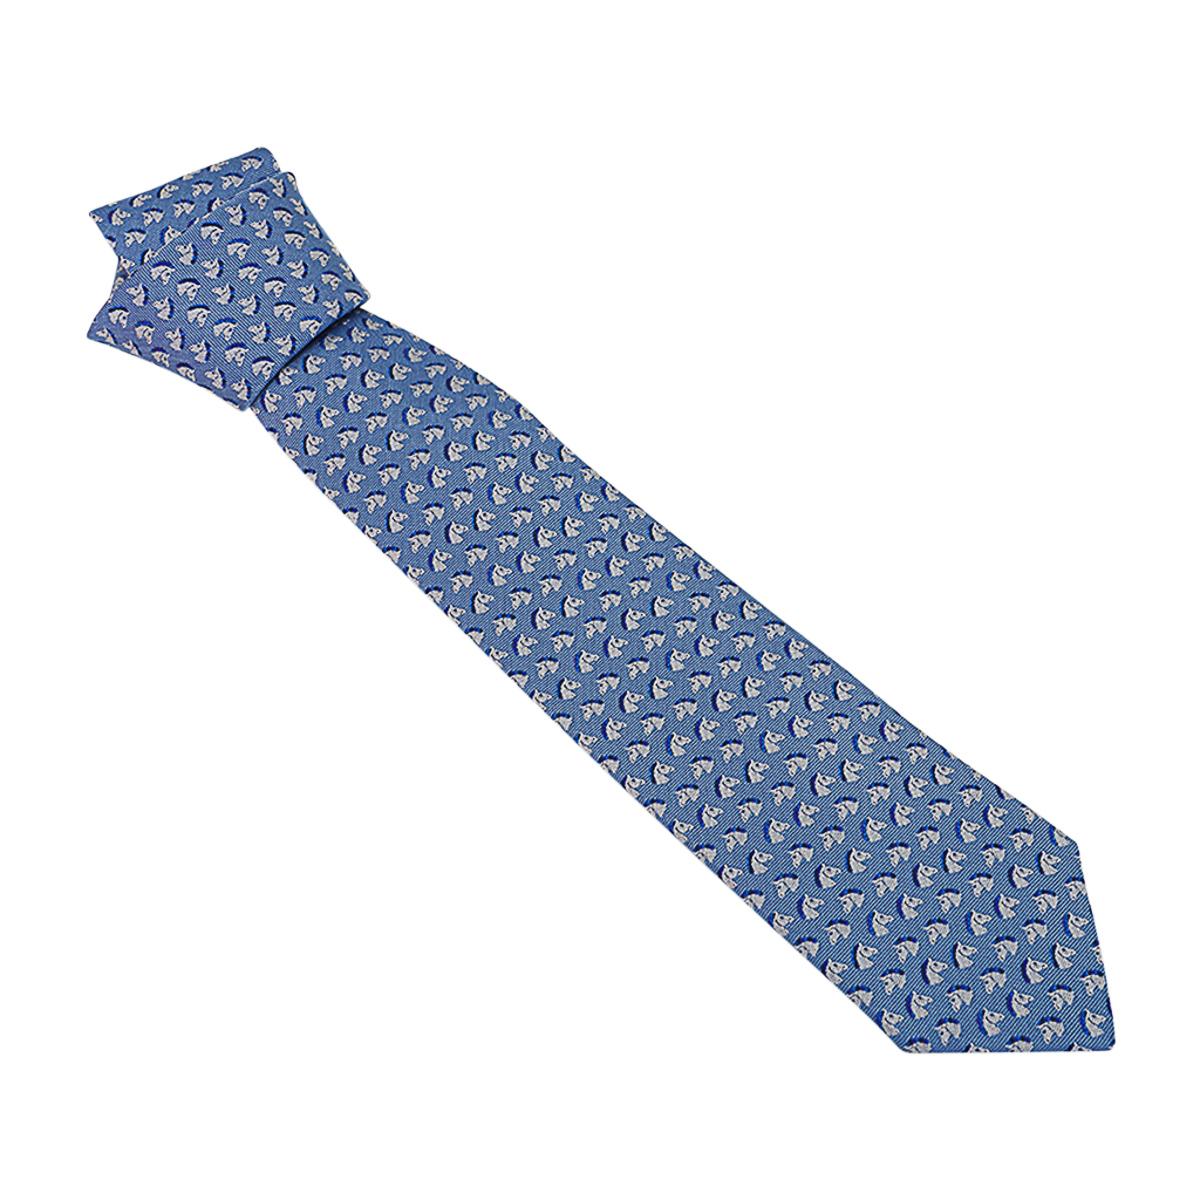 Hermes Cheval Rebelle Tie 7 Ciel Blanc and Marine Heavy Silk Twill For Sale 1